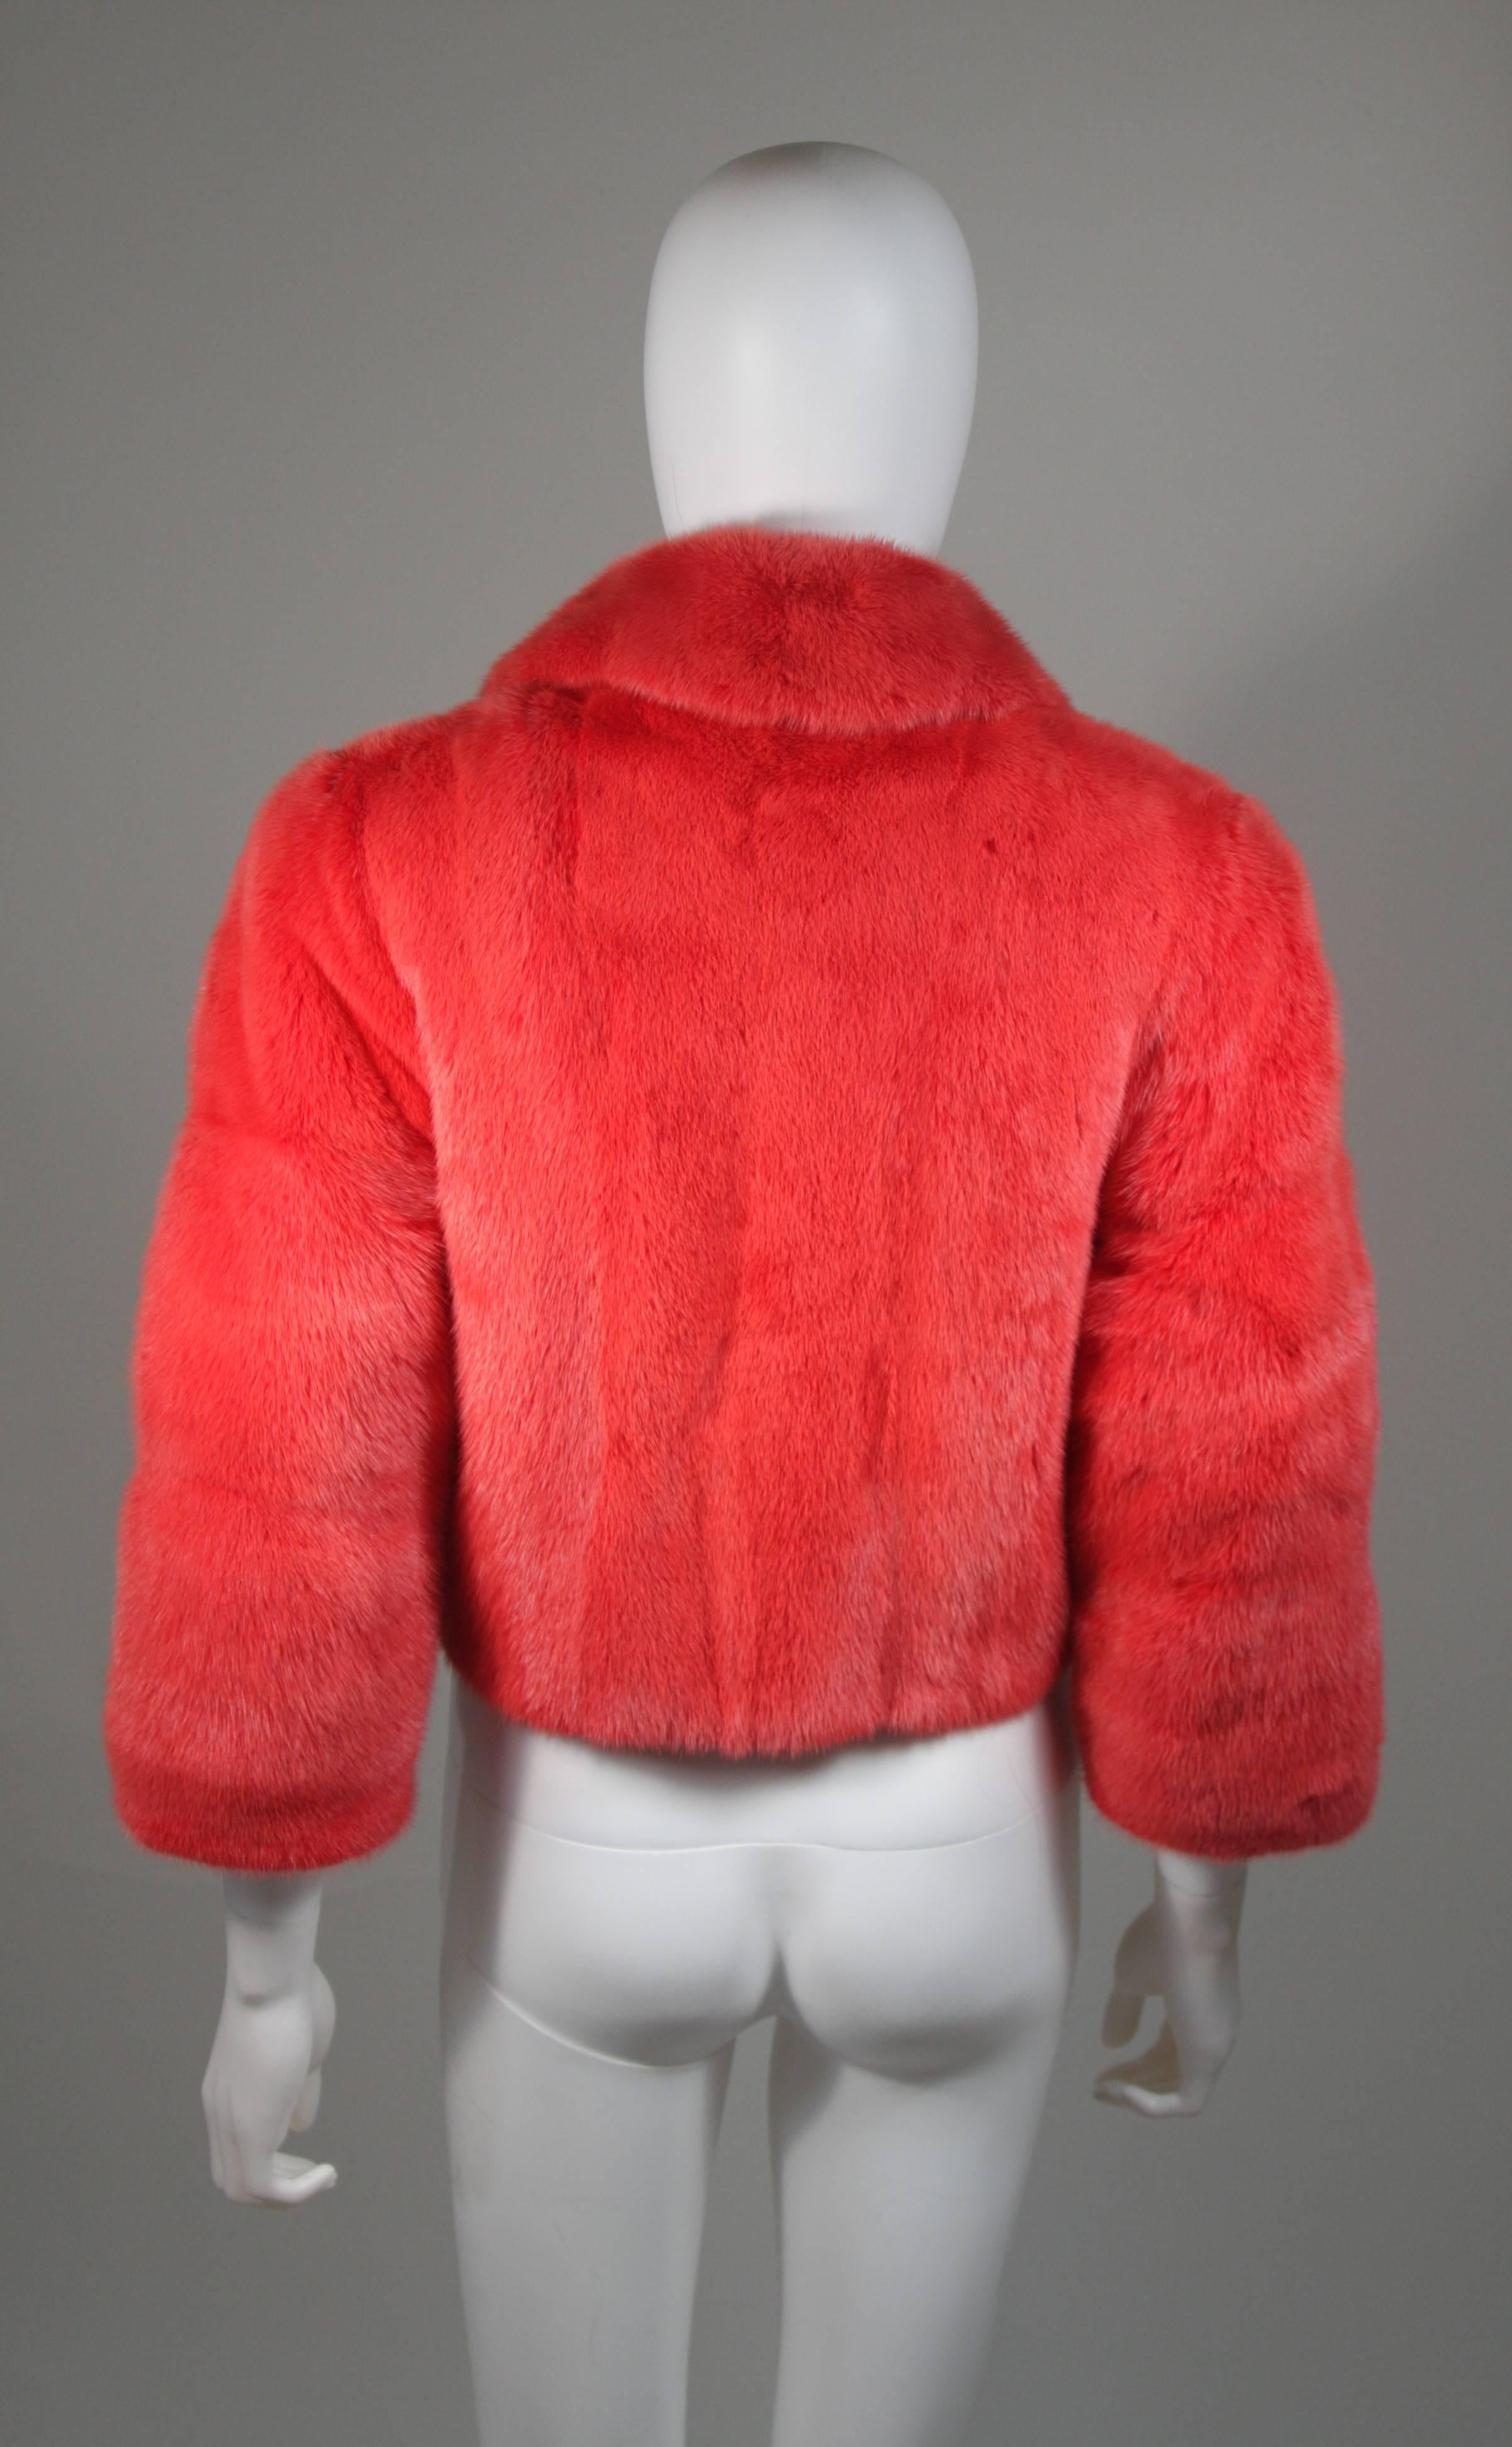 Female Mink Jacket in Strawberry Custom Order in Your Size 2